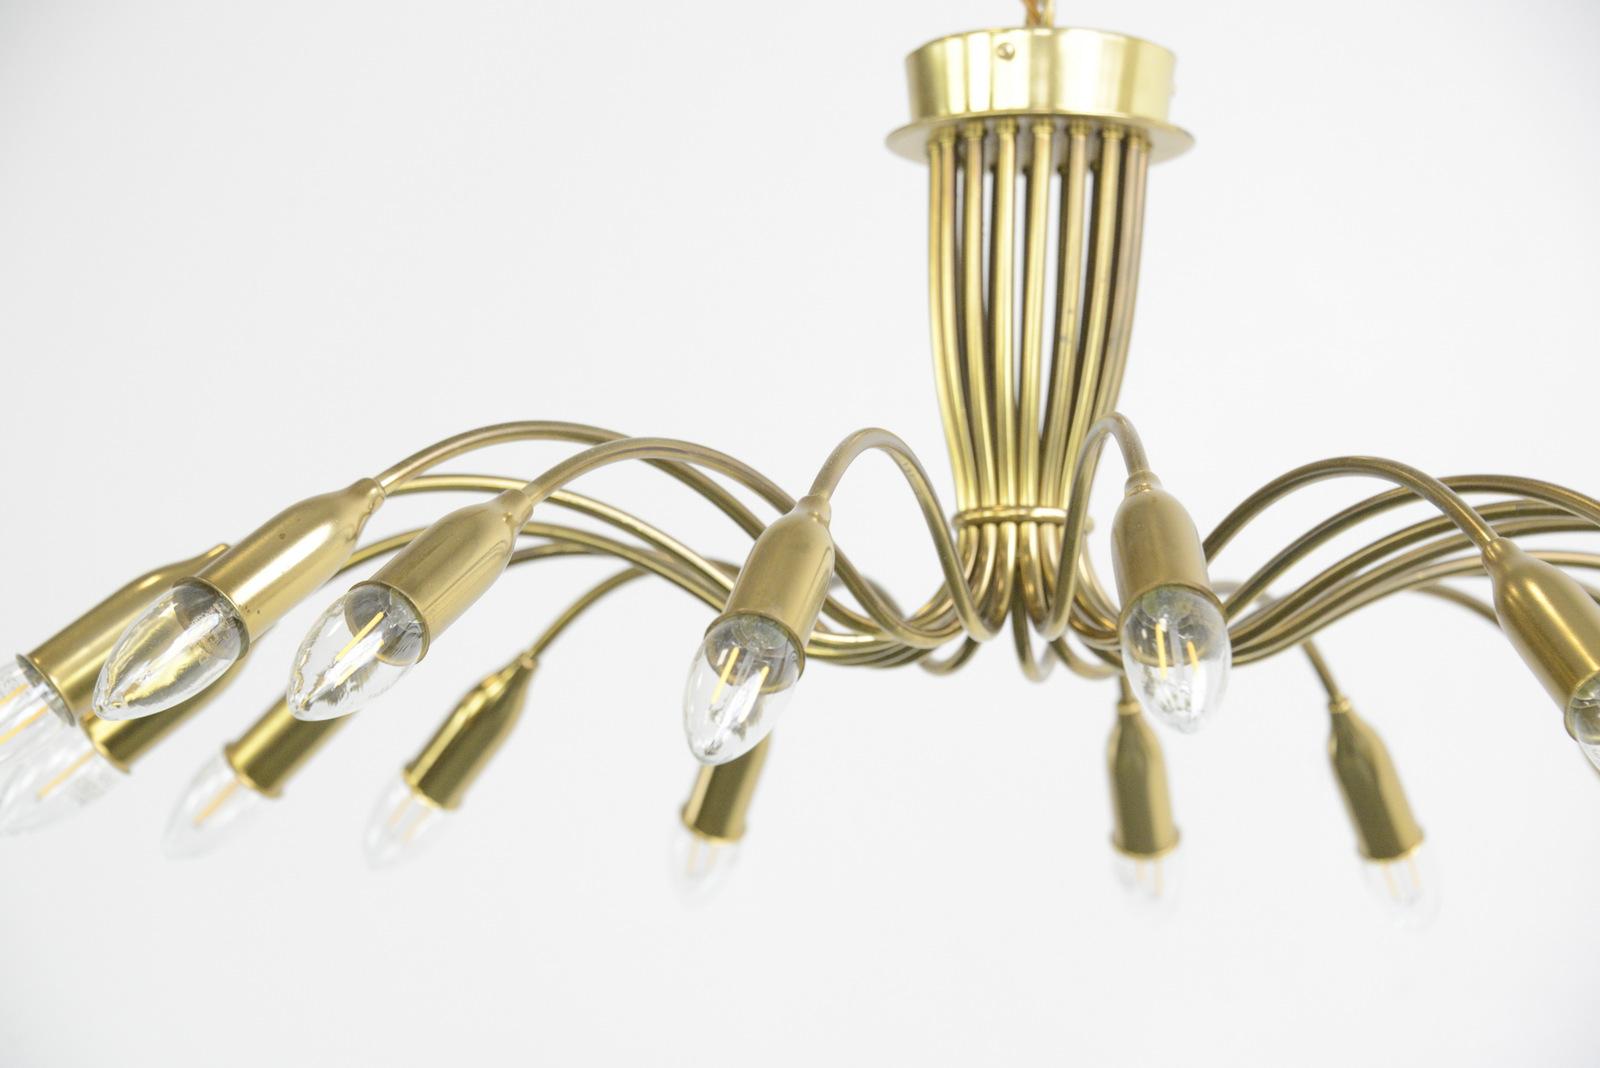 Large midcentury brass spider chandelier, circa 1950s

- Curved tubular brass
- 18 arms
- Takes E14 fitting bulbs
- Comes with brass chain and ceiling rose
- German, 1950s
- Measures: 89 cm wide x 37 cm tall

Condition report

Fully re